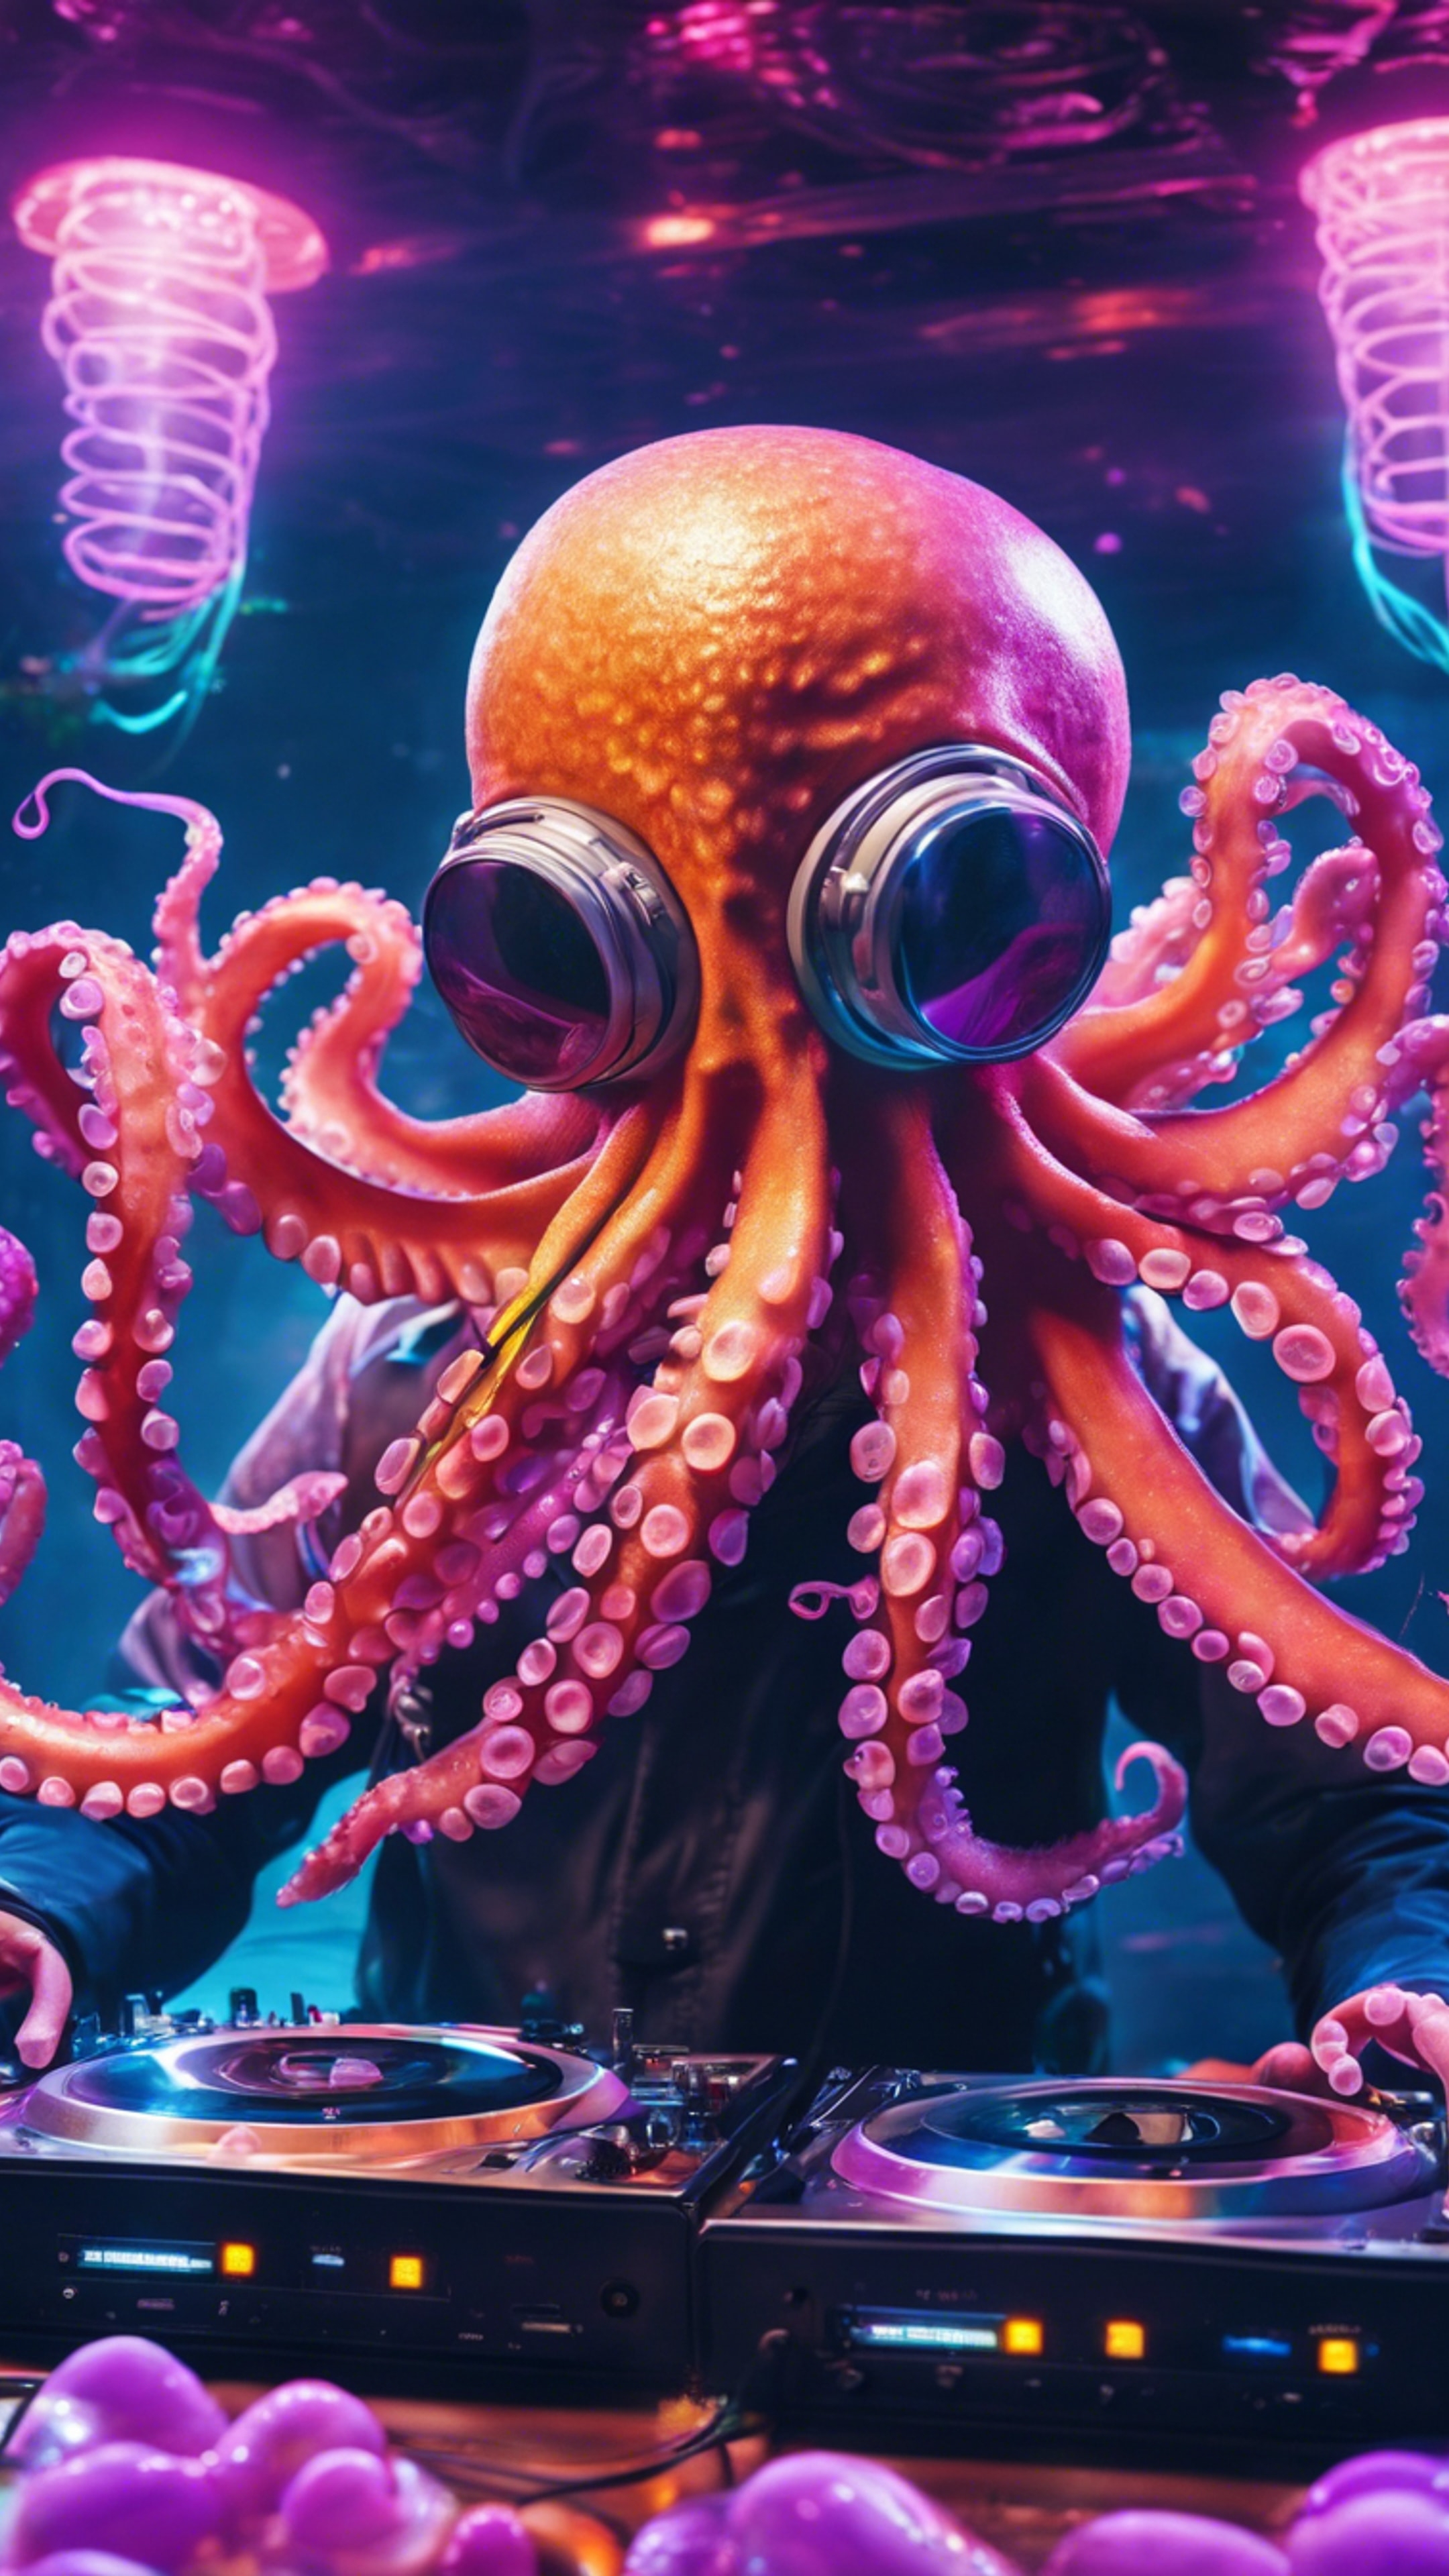 An octopus DJ controlling the music at an underwater rave amidst neon jellyfish. ورق الجدران[8d0f478d59094f5192d2]